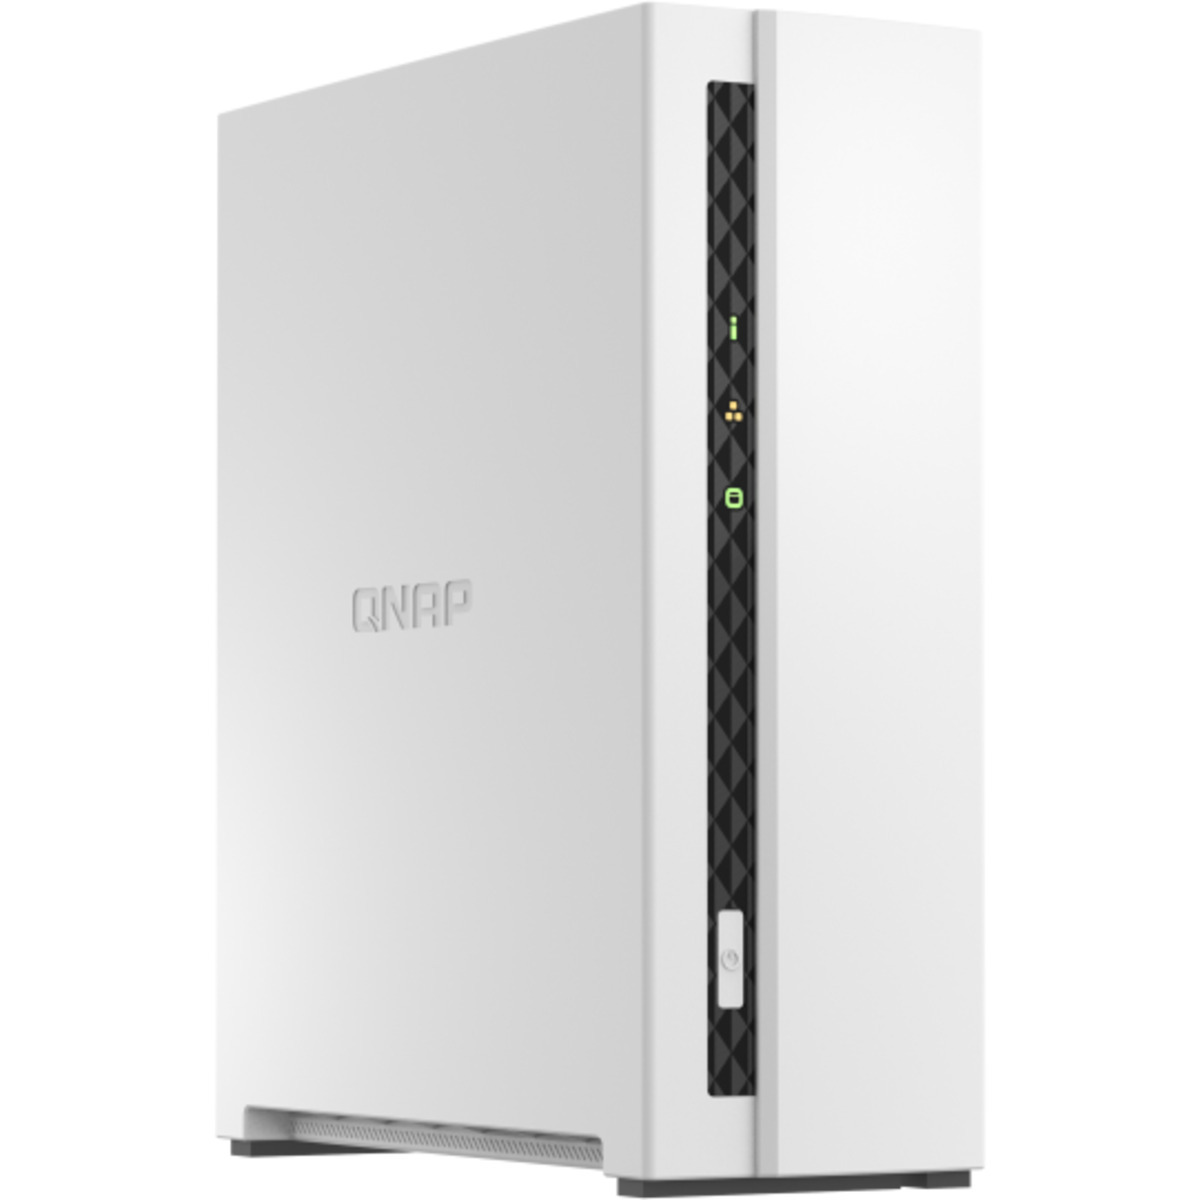 buy $273 QNAP TS-133 2tb Desktop NAS - Network Attached Storage Device 1x2000gb Seagate BarraCuda ST2000DM008 3.5 7200rpm SATA 6Gb/s HDD CONSUMER Class Drives Installed - Burn-In Tested - ON SALE - nas headquarters buy network attached storage server device das new raid-5 free shipping usa TS-133